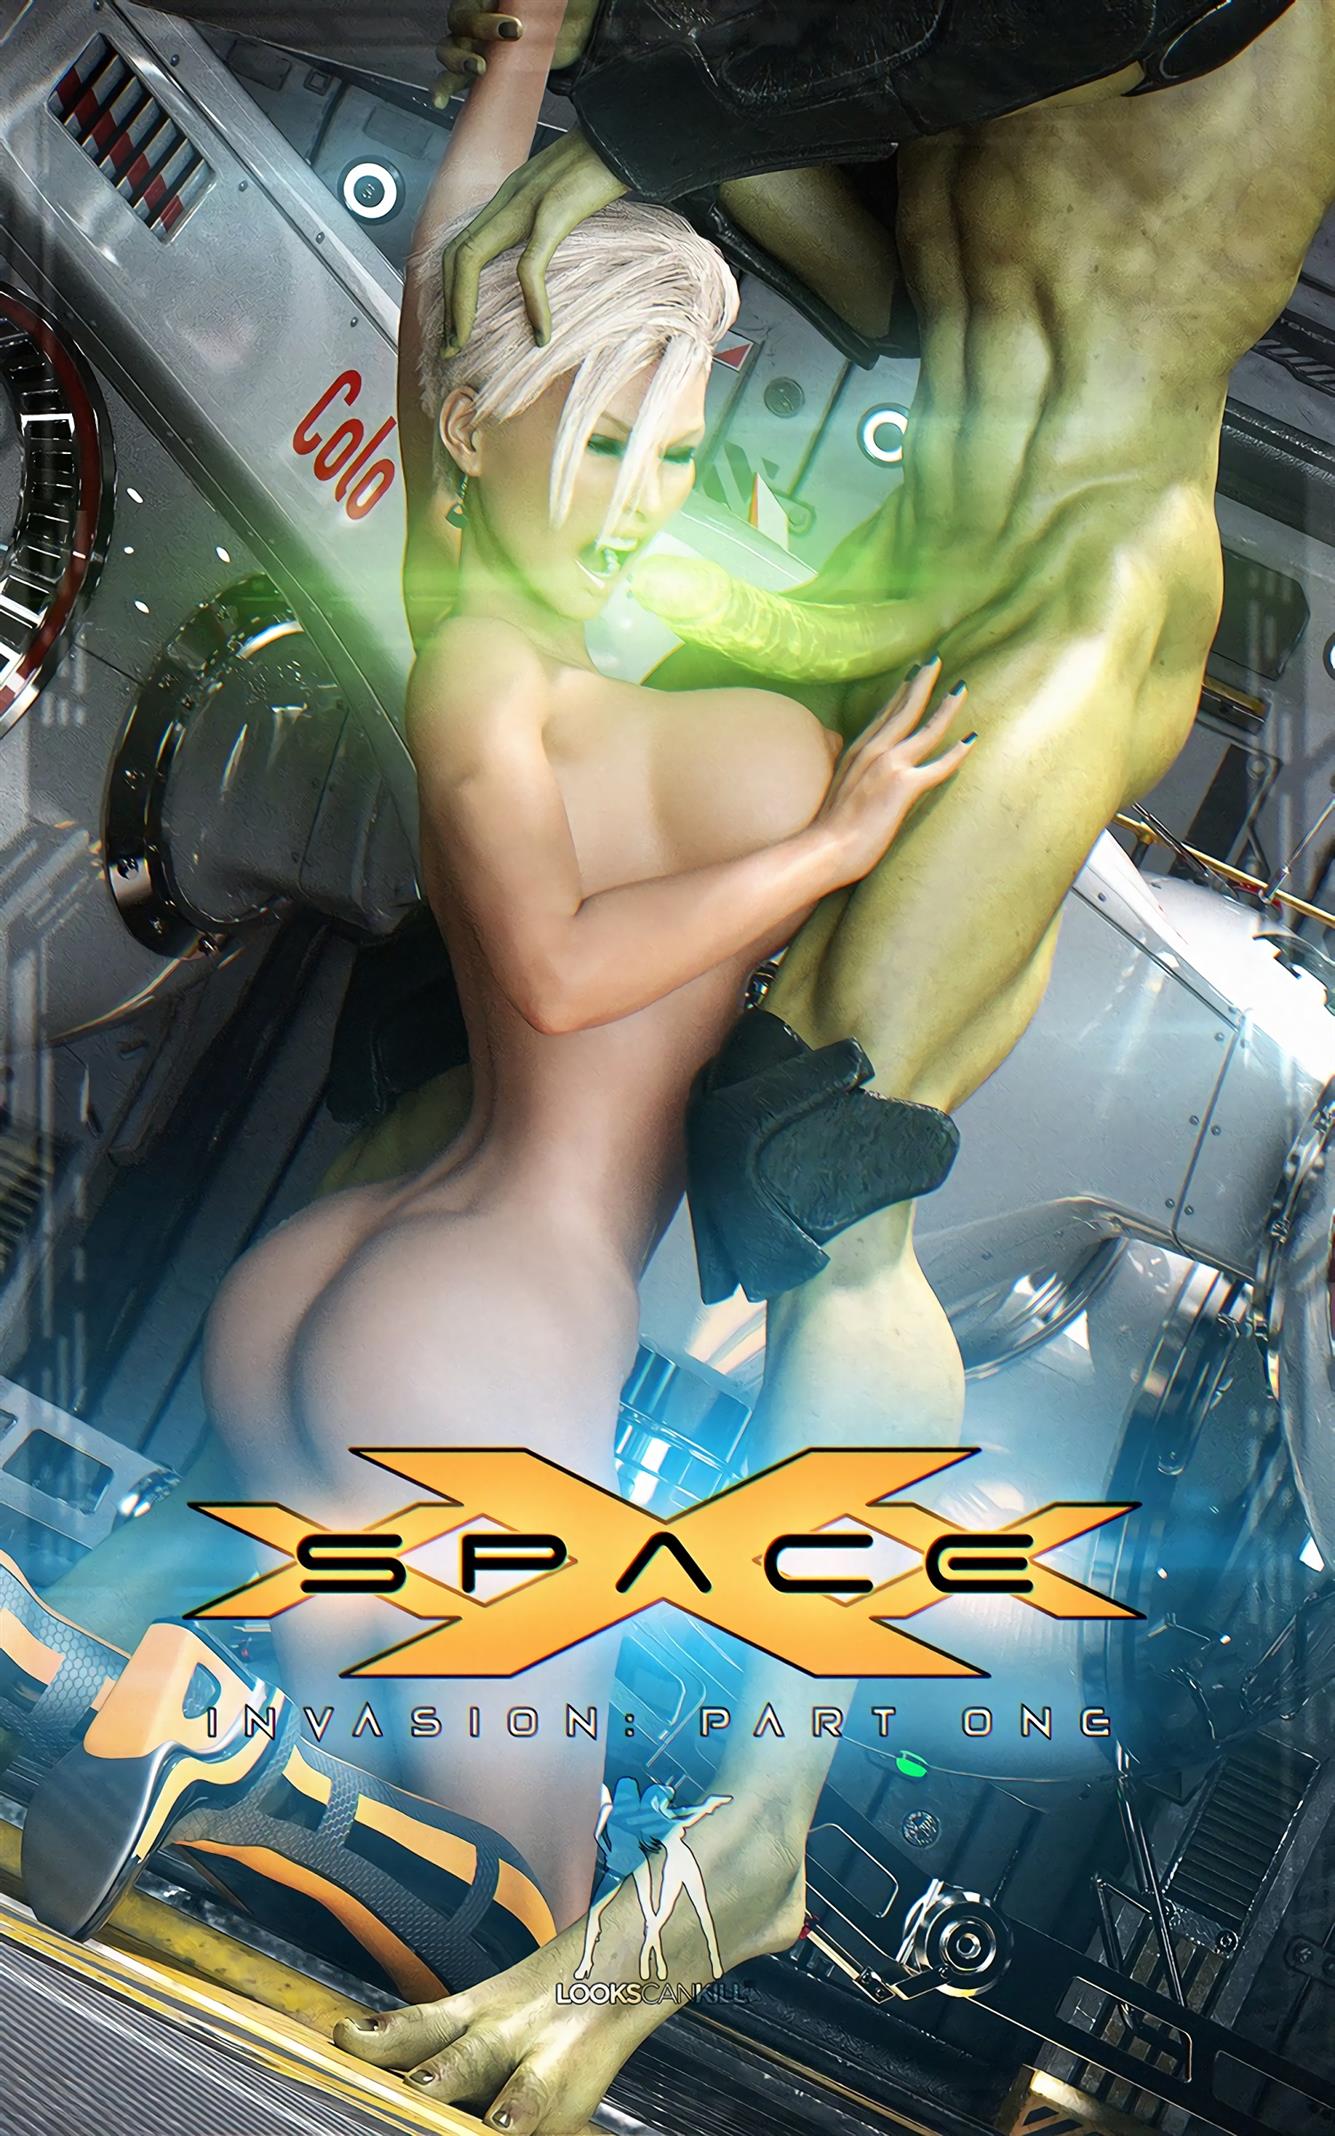 Space XXx- Invasion: Part One [Looks Can Kill]